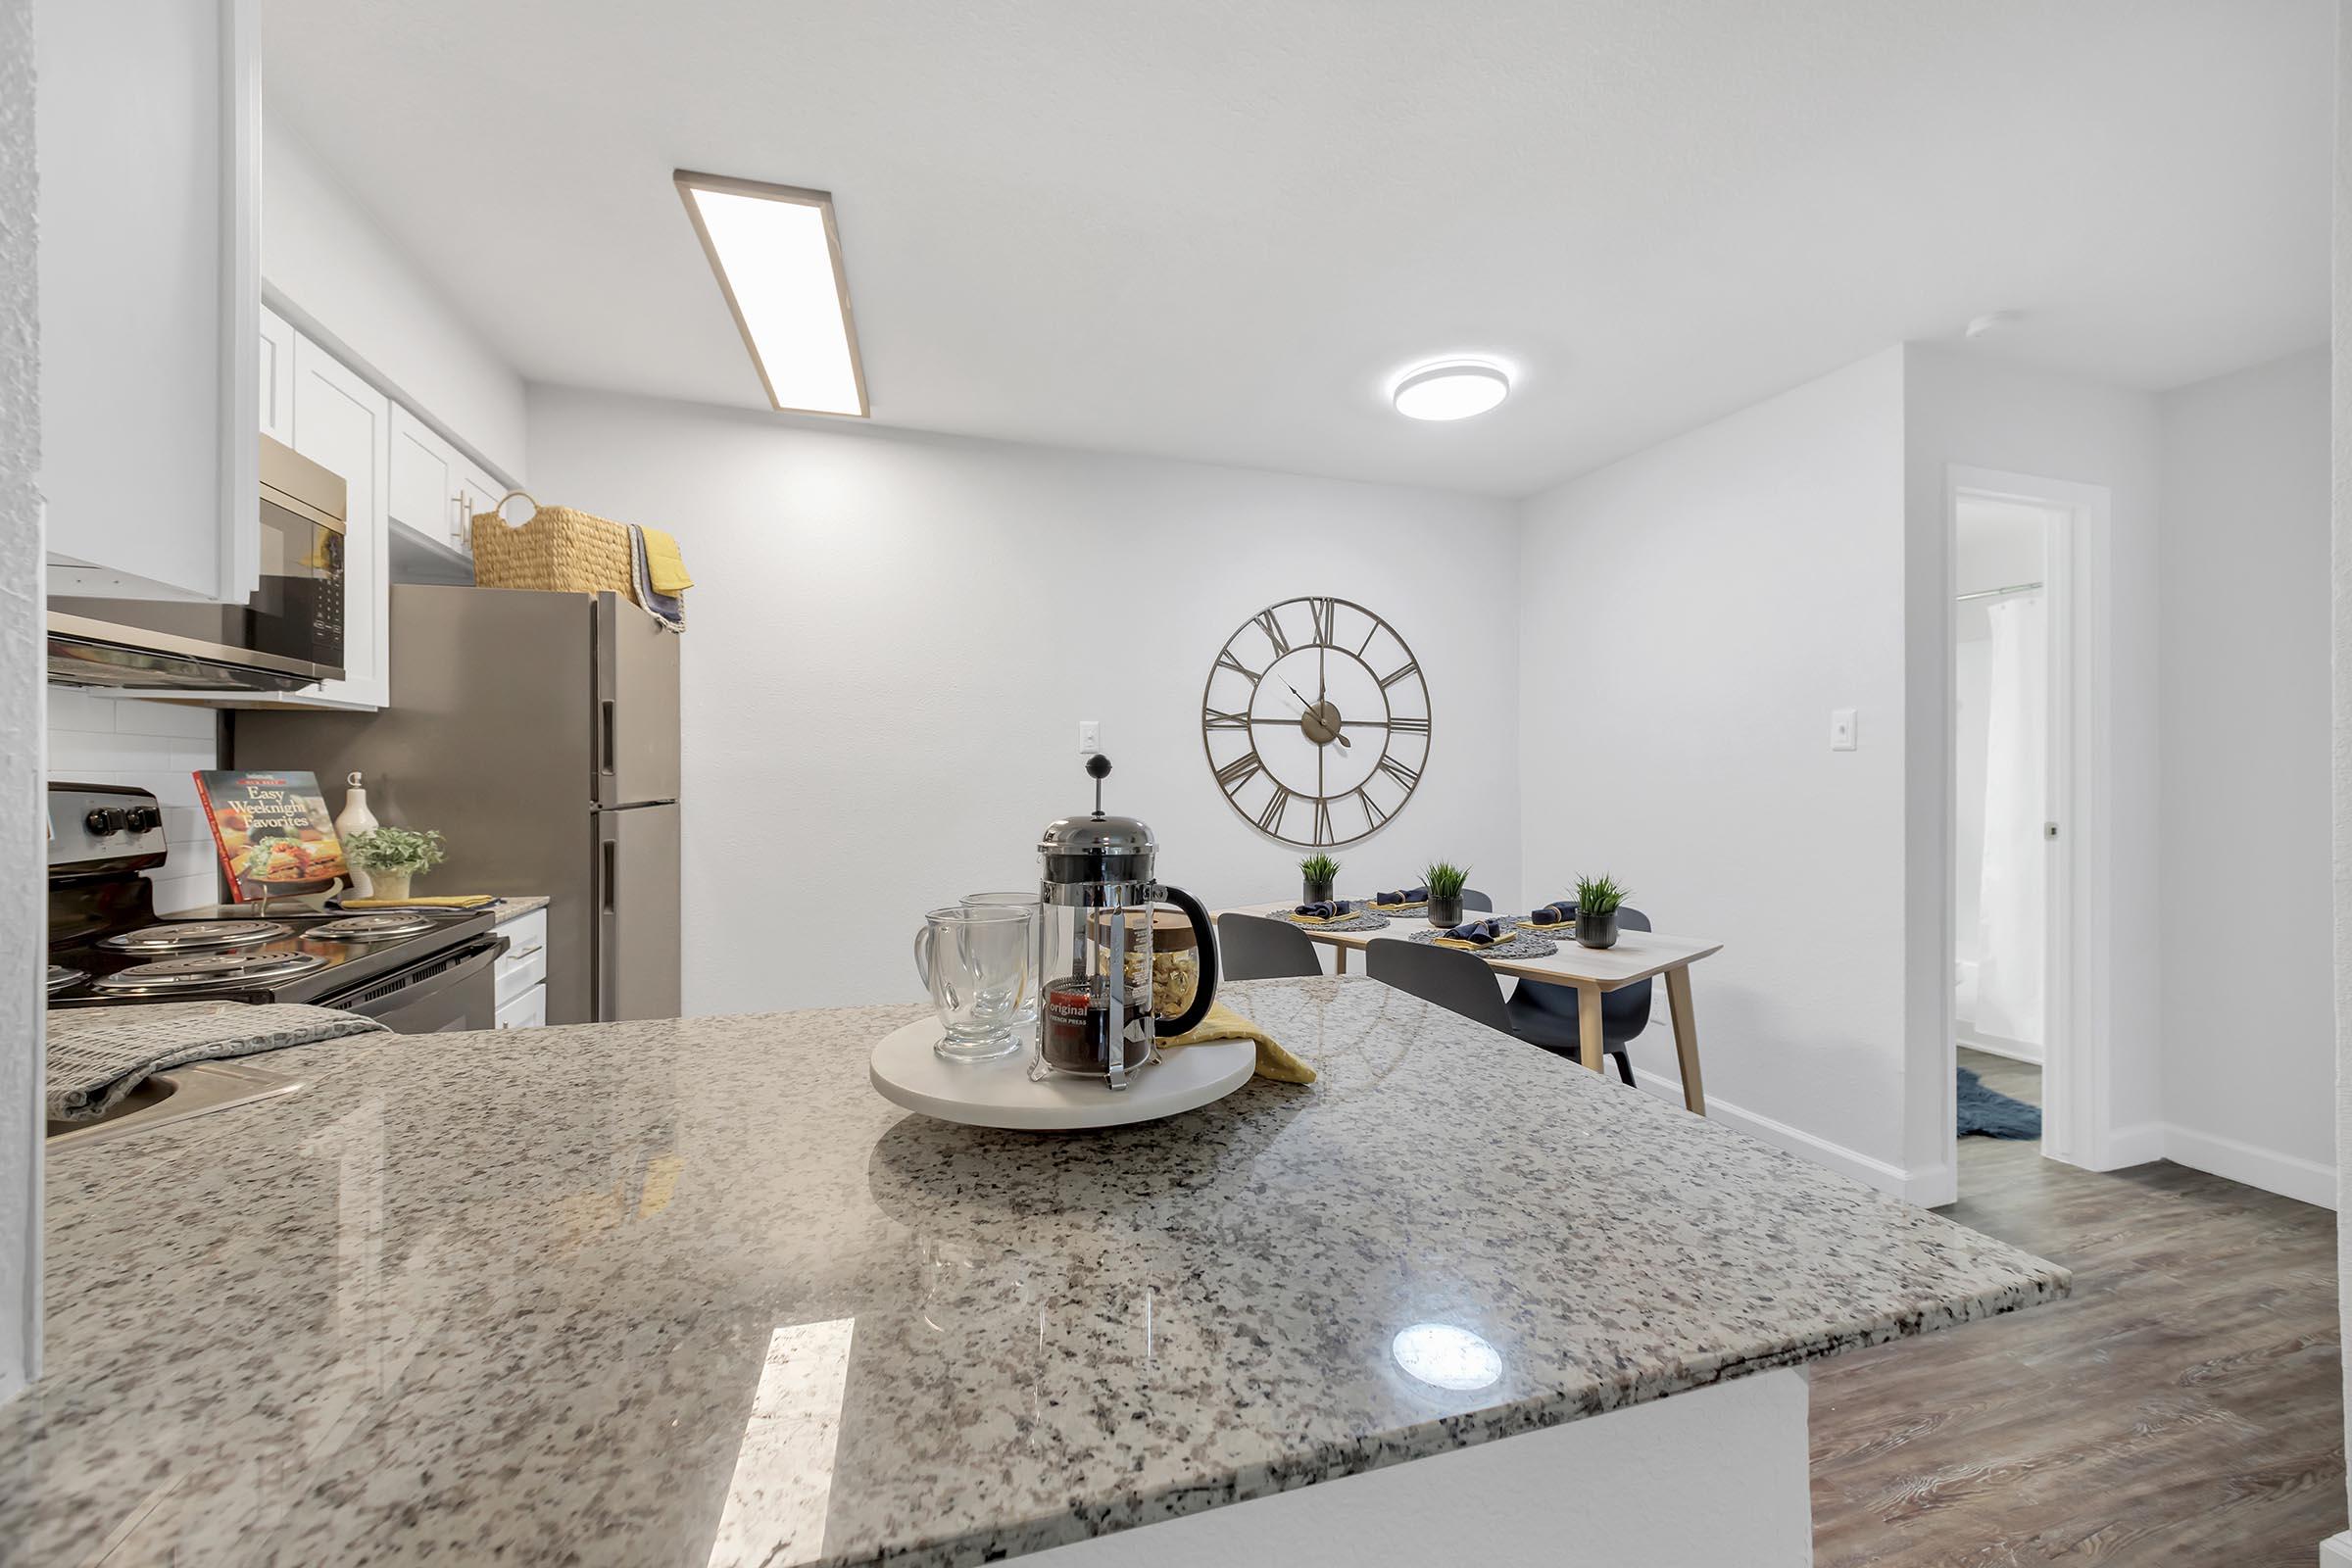 a kitchen with a clock on the counter